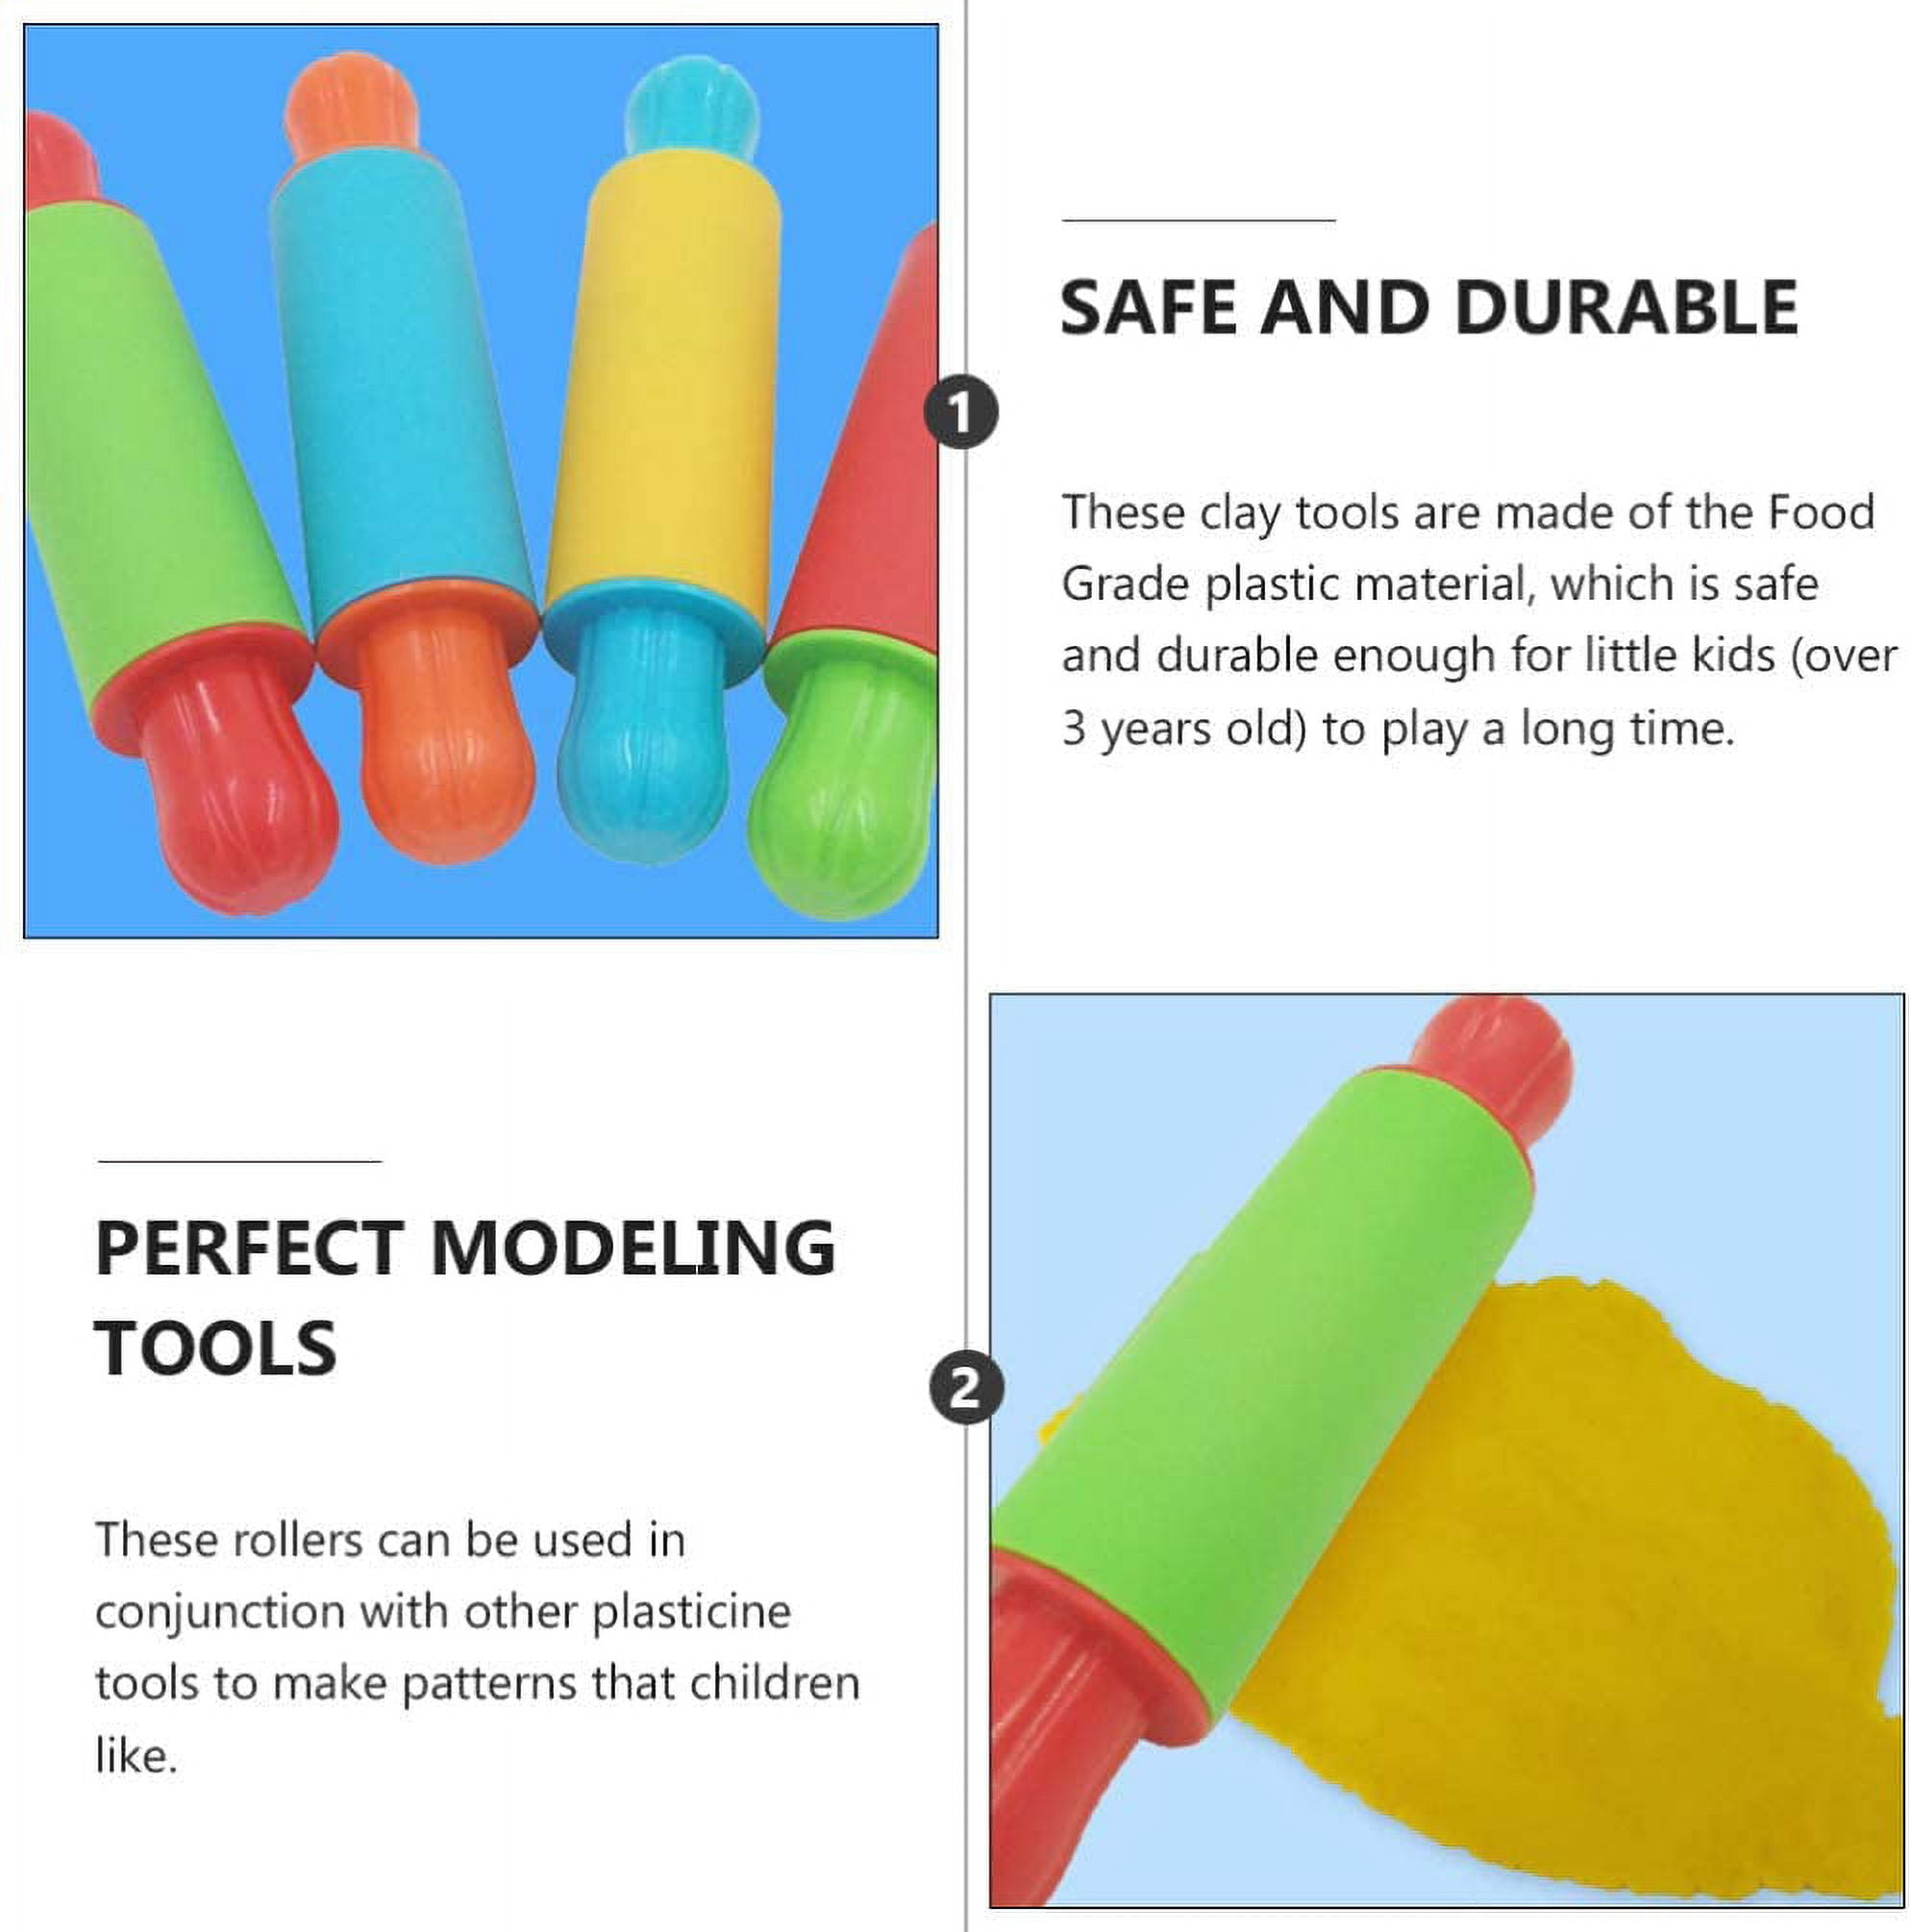 PINXOR 7pcs Funny DIY Plastic Handheld Roller Art Clay Toy Clay Rolling Pin Dough Tool for Children (Random Color), Kids Unisex, Size: 22